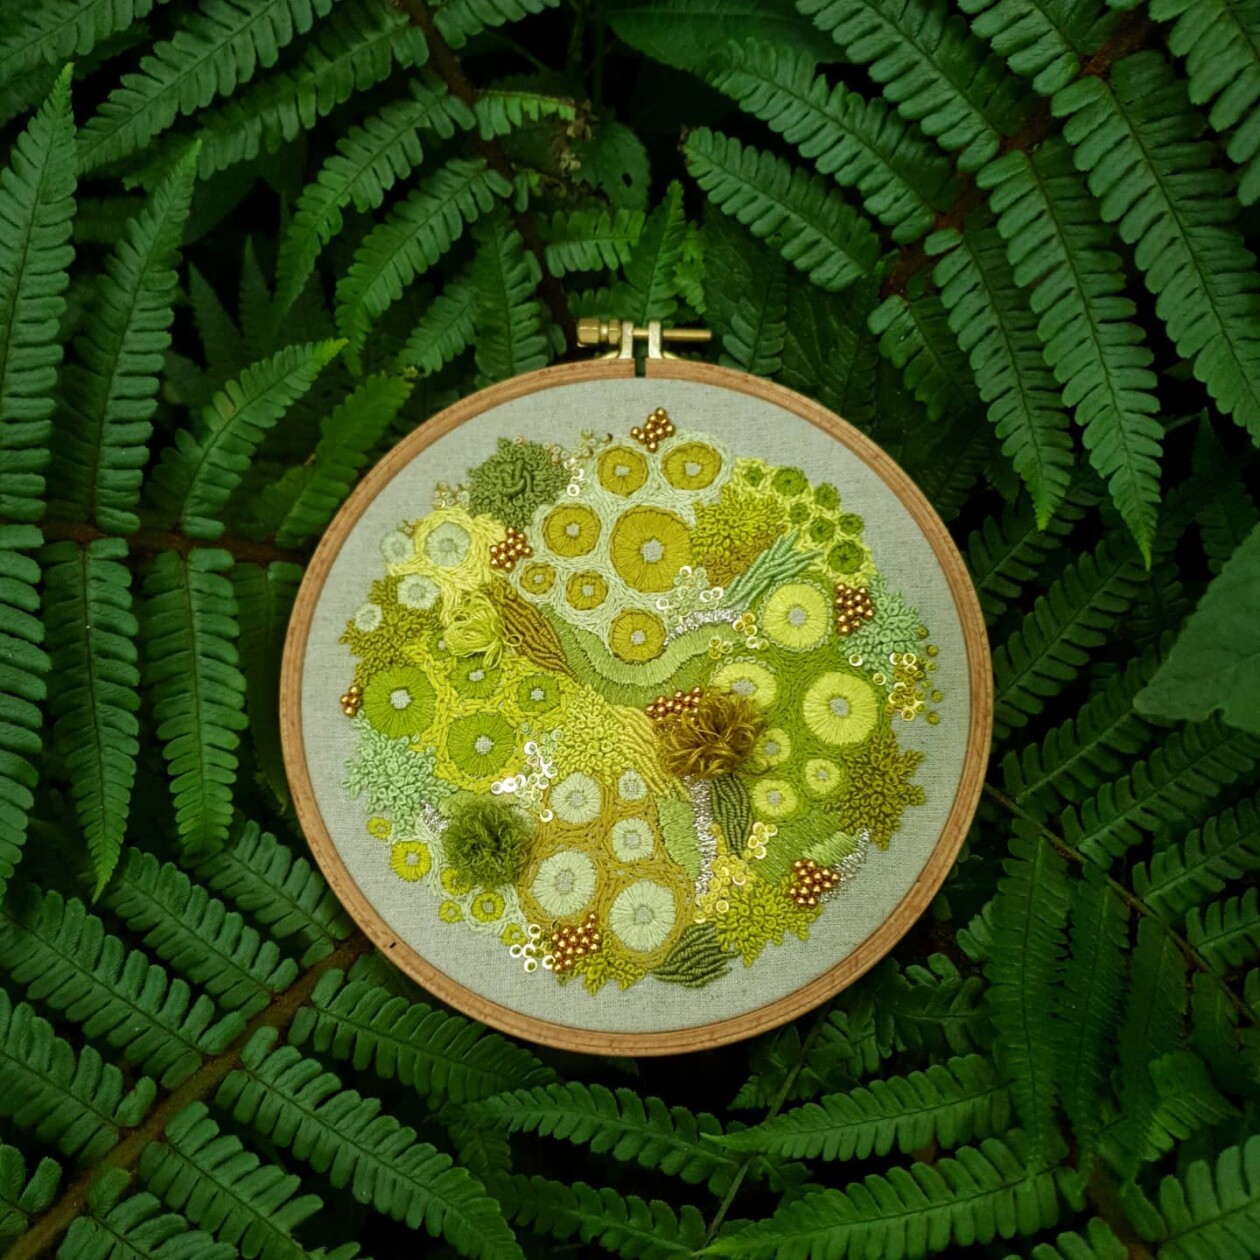 Marvelous Embroideries Inspired By Moss, Coral, And Lichen Forms By Hannah Kwasnycia (5)